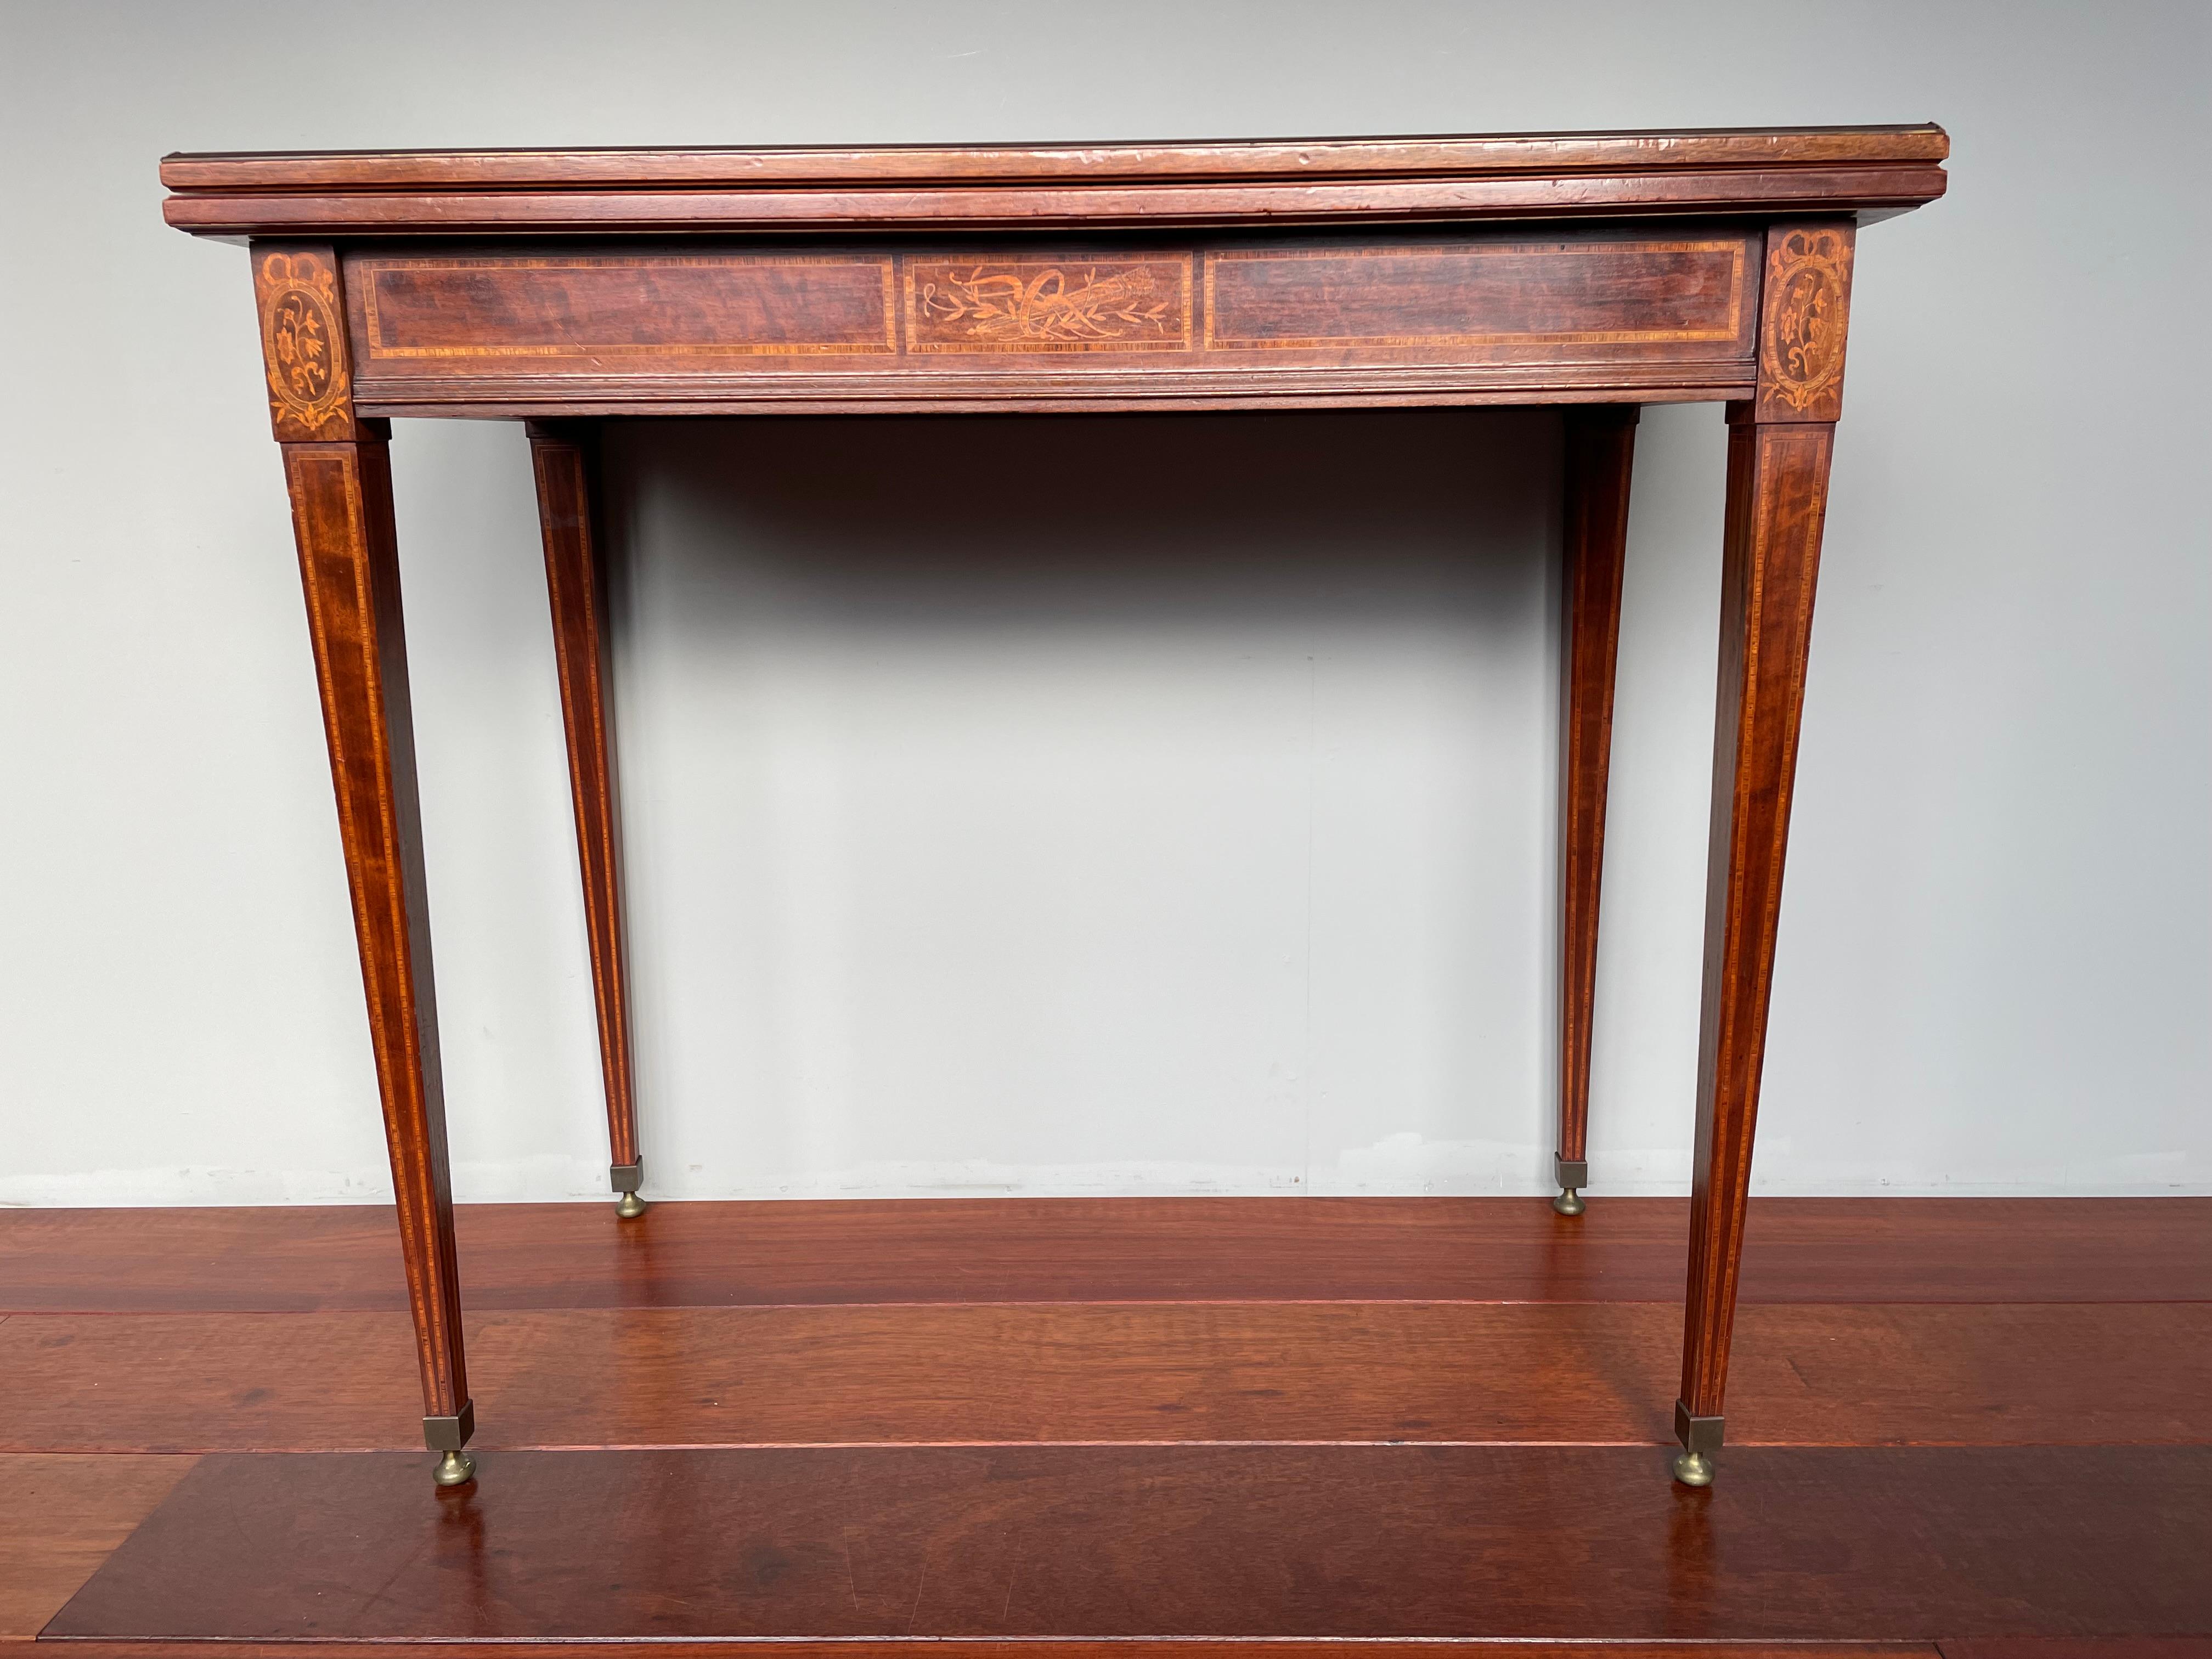 Stylish antique sidetable, also for unforgettable games of poker, bridge etc.

If you are looking for a beautiful antique sidetable to grace your living space then this all handcrafted specimen from 1880-1900 could be flying your way soon. This